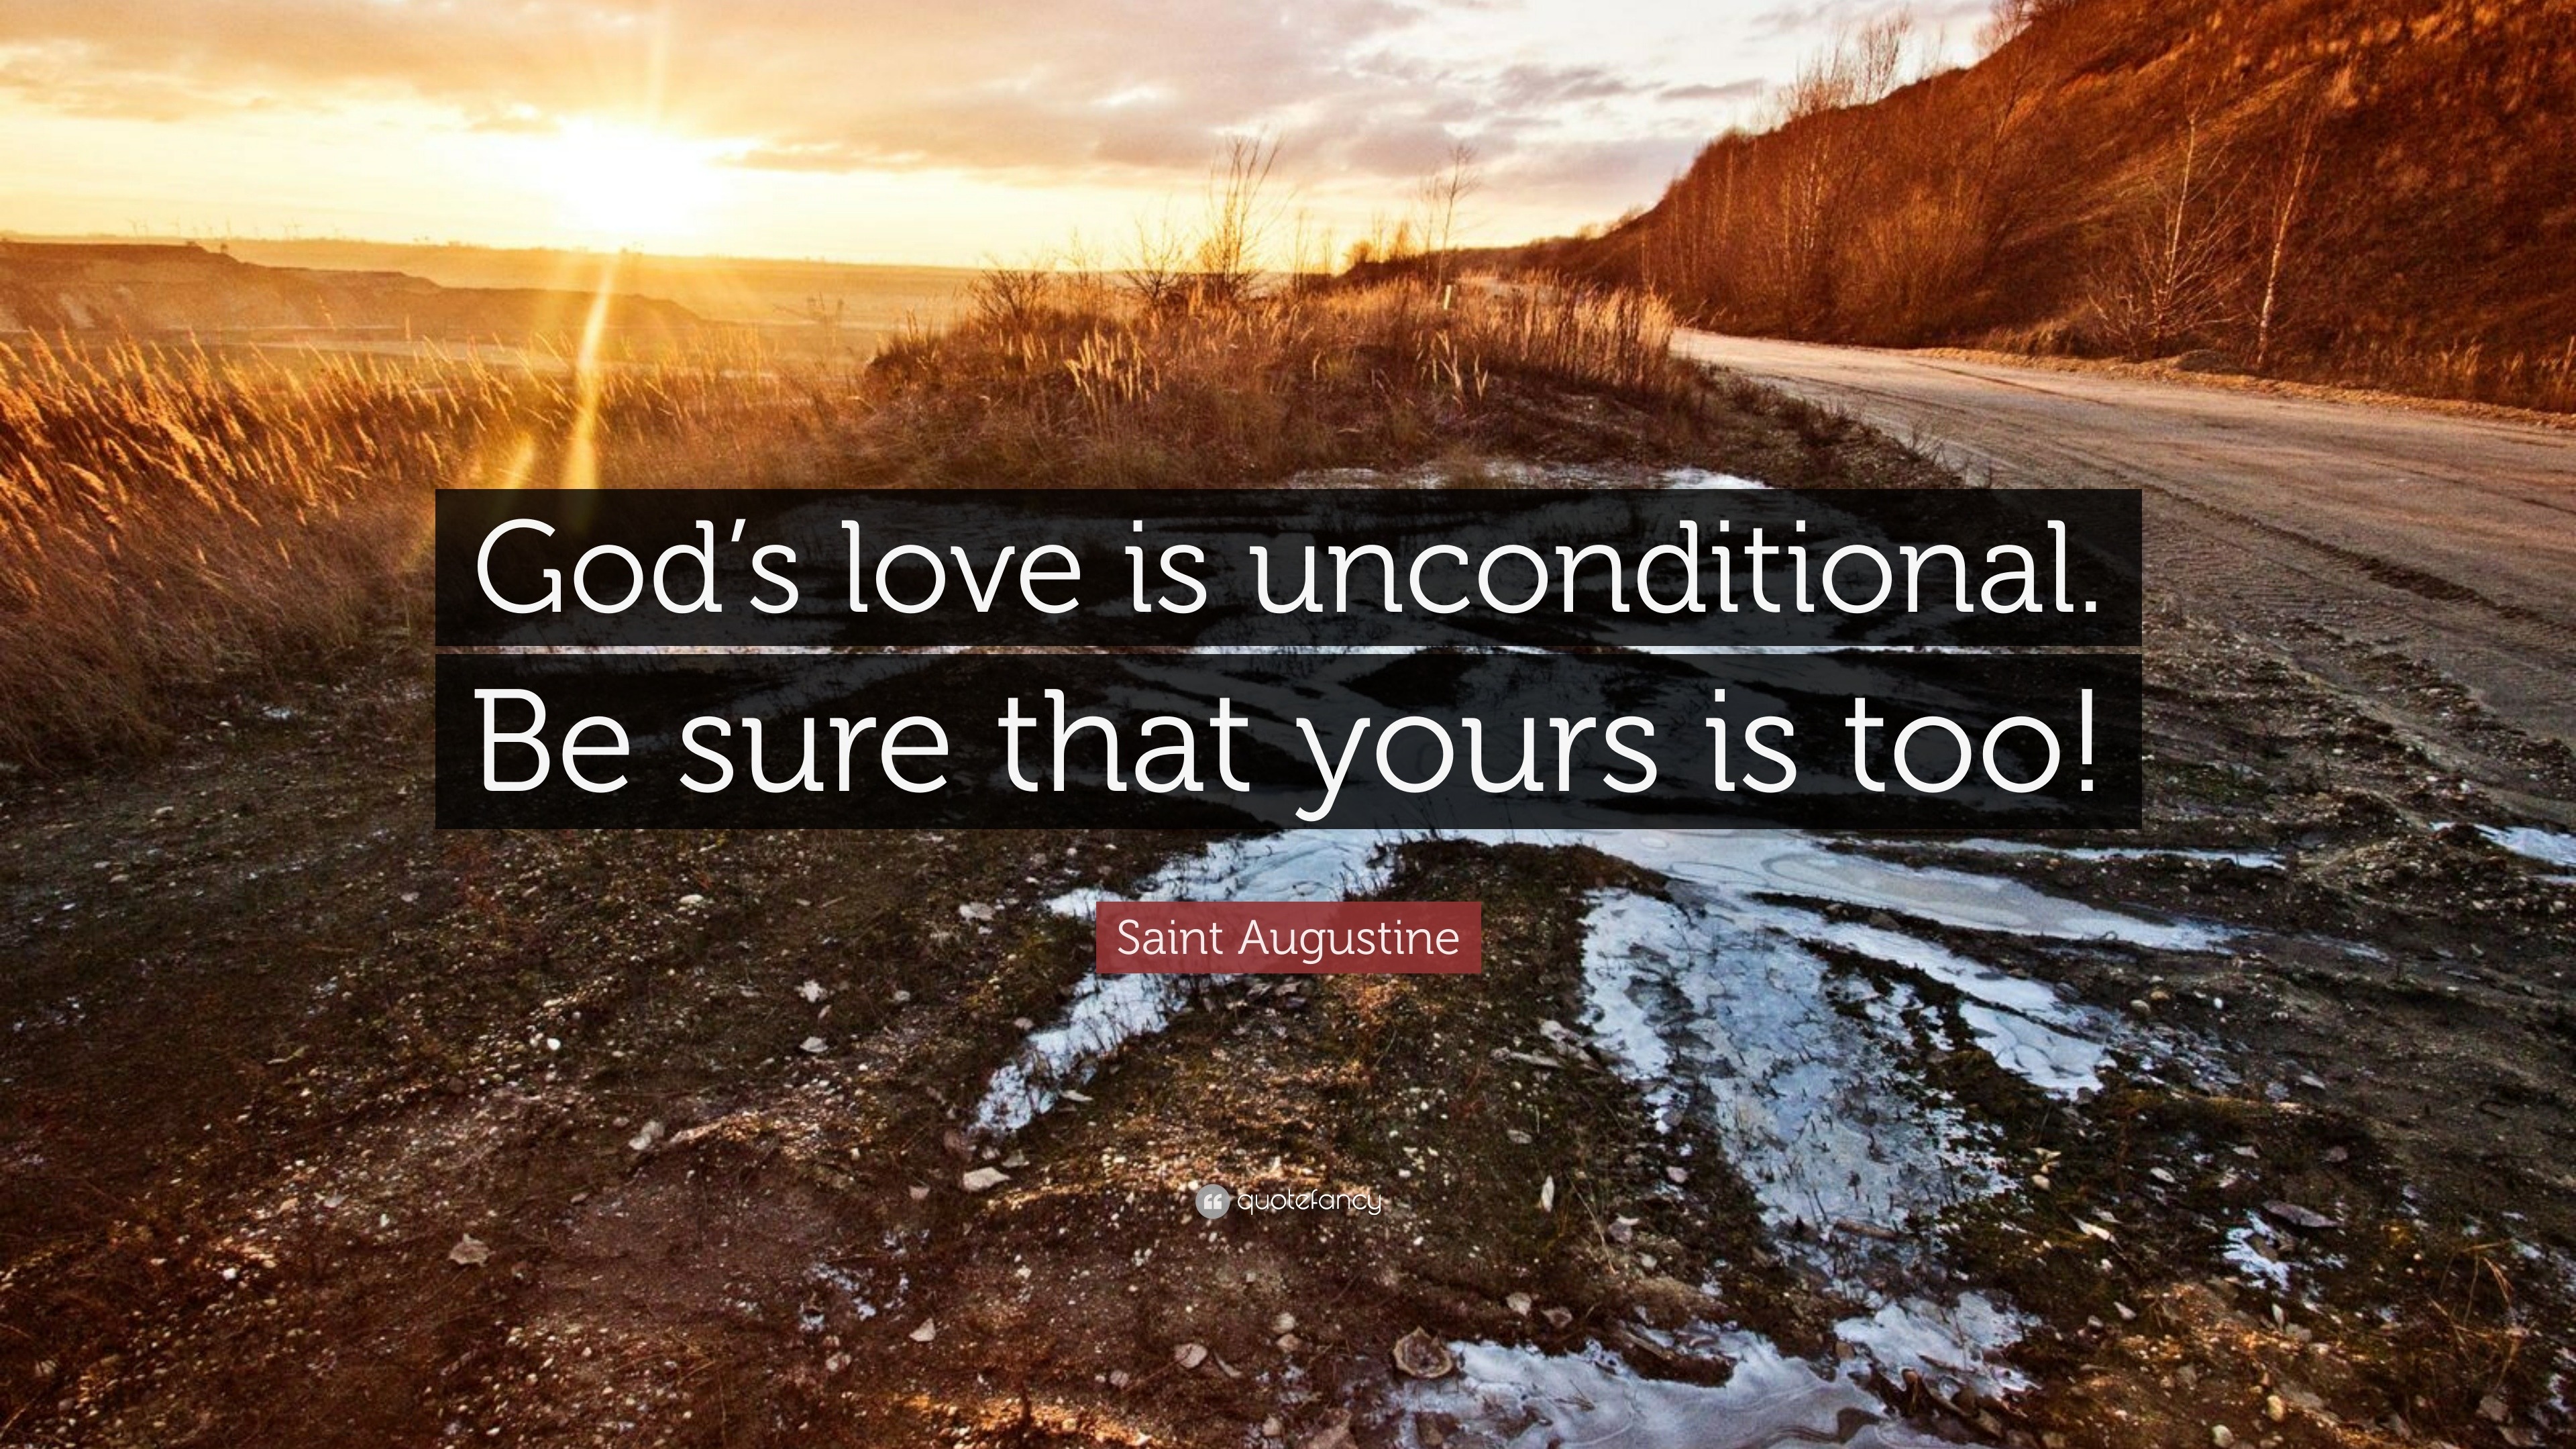 Saint Augustine Quote: “God's love is unconditional. Be sure that yours is  too!”